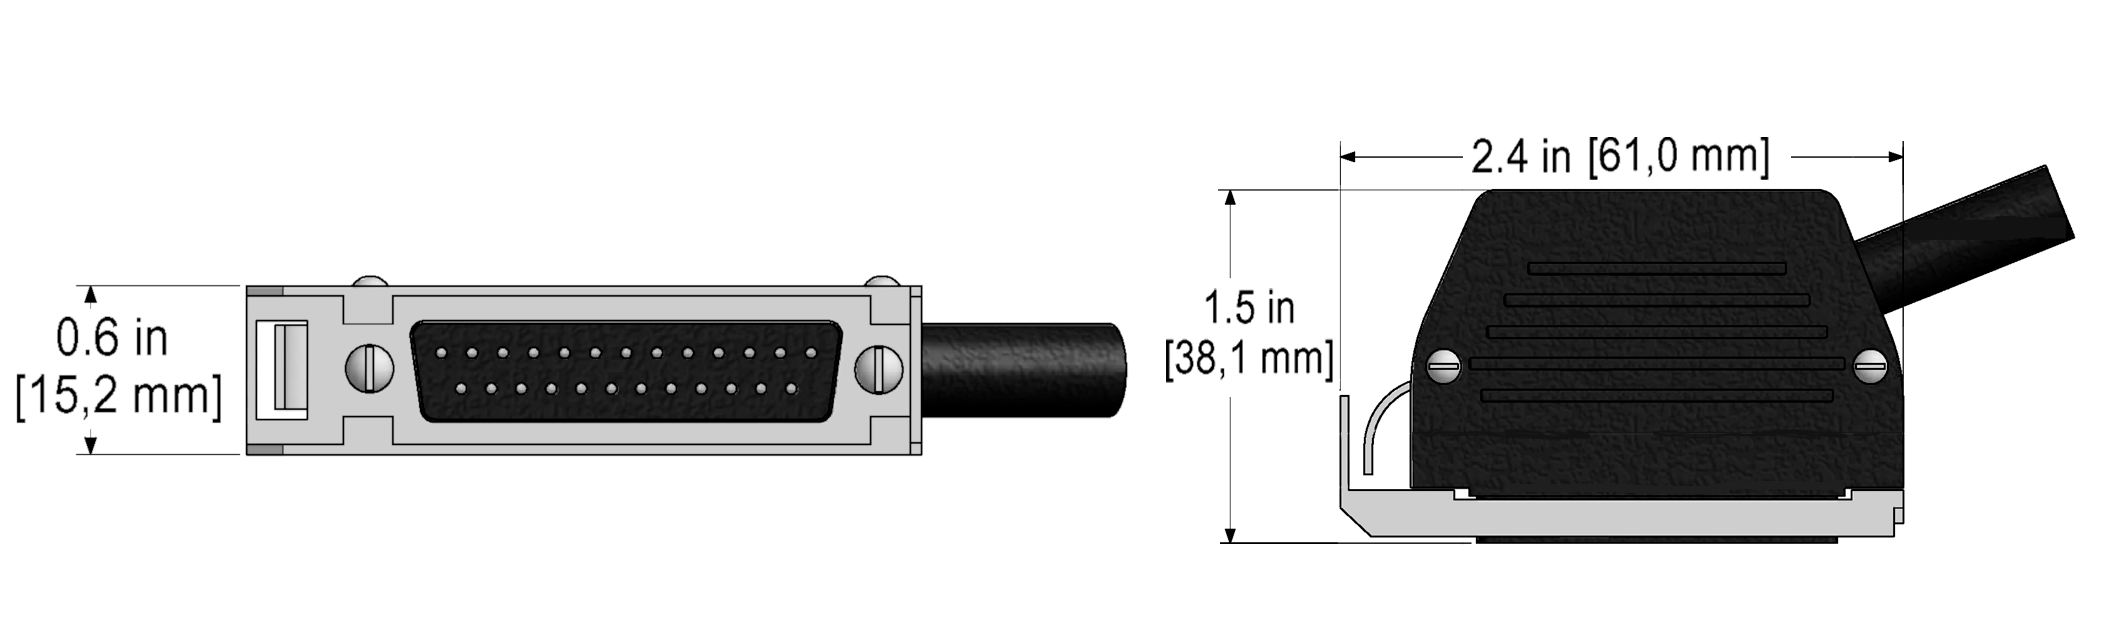 A line drawing showing the diameter and length of an assembled CTC C3 vibration sensor connector kit.